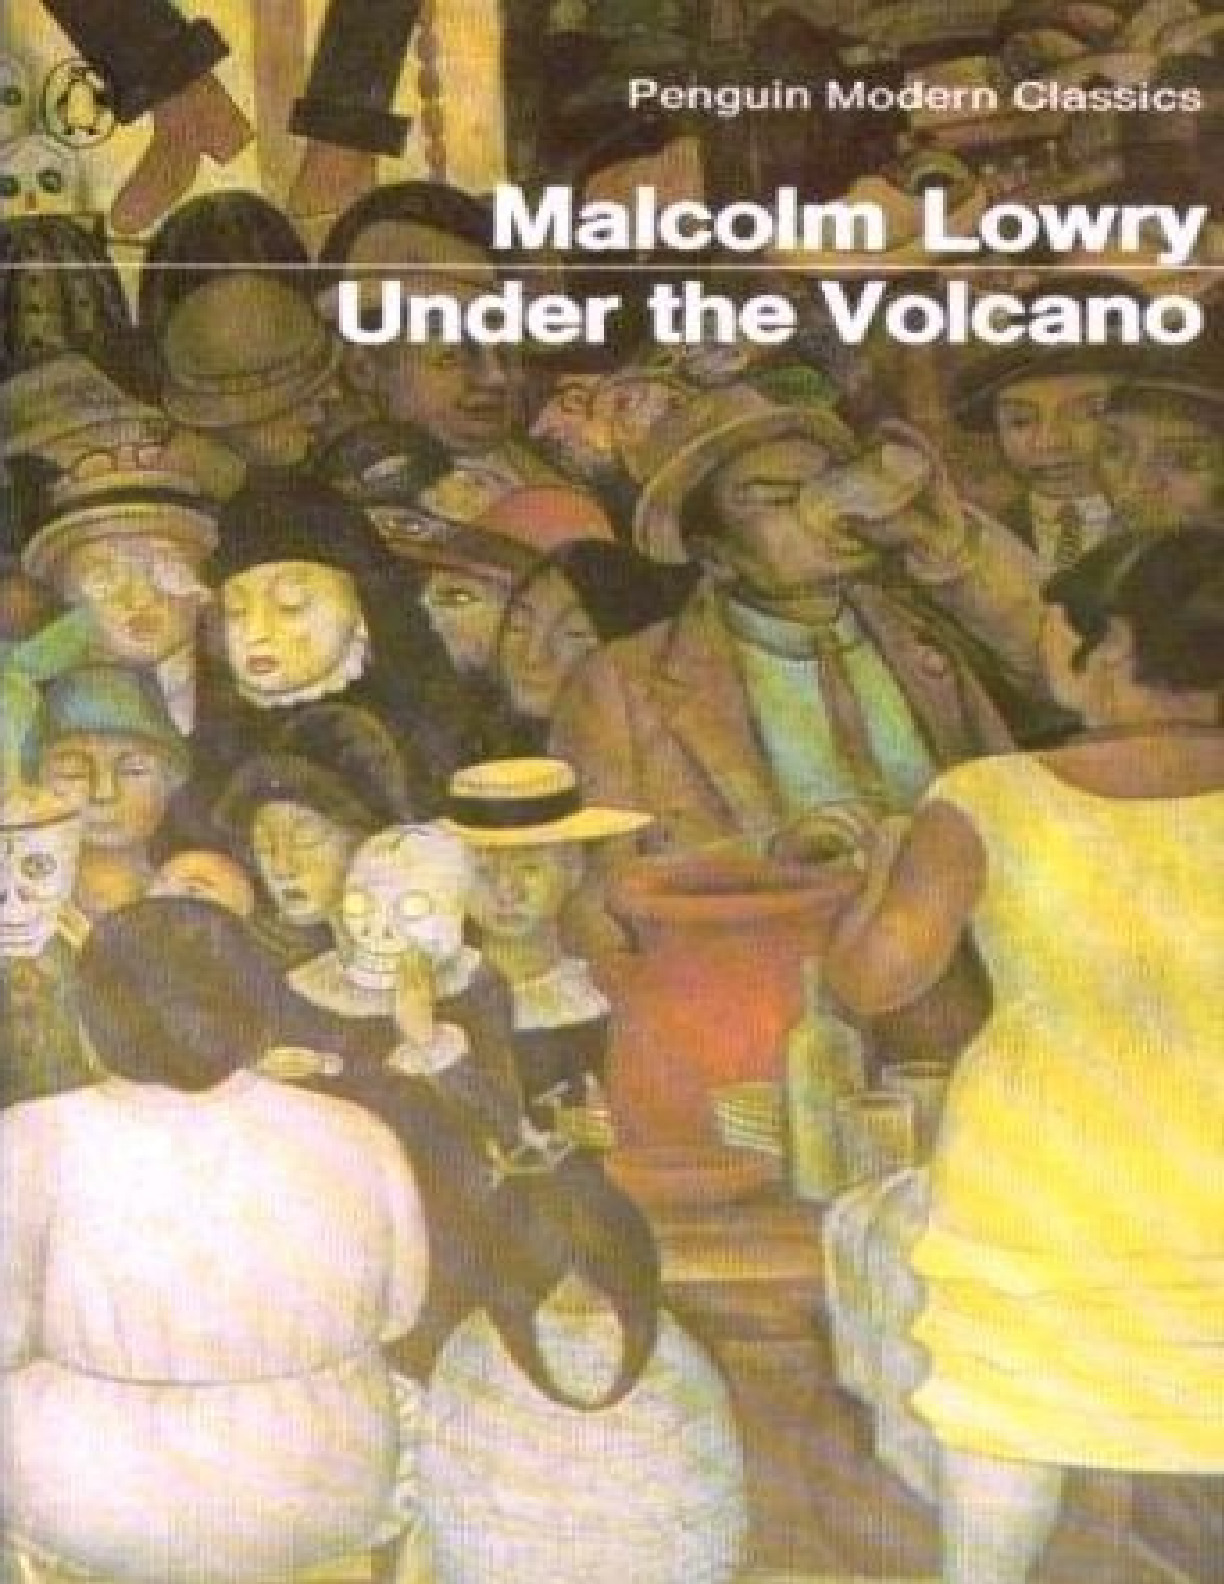 Under the Volcano – Malcolm Lowry